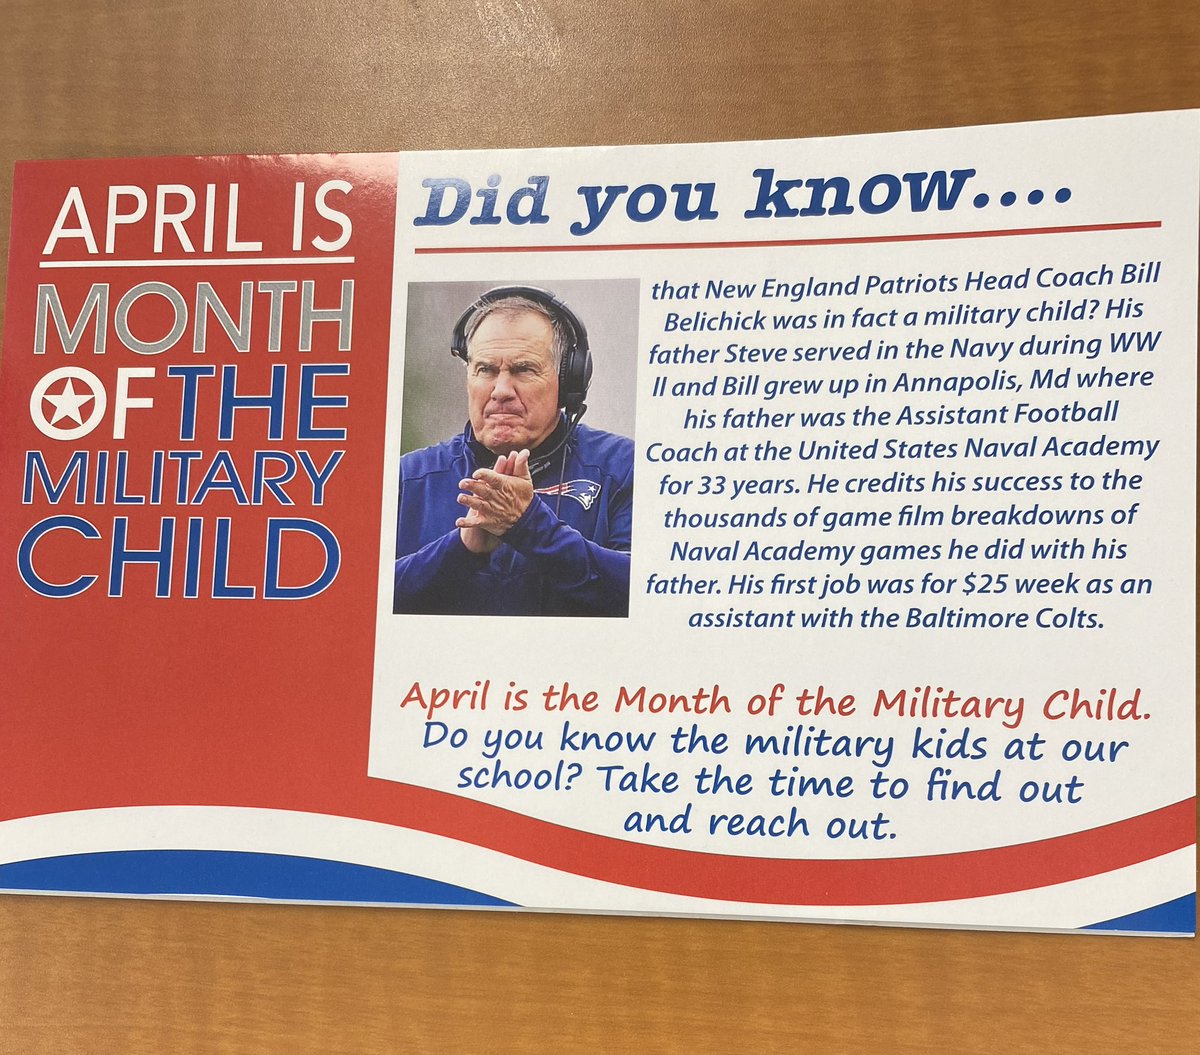 Month of the Military Child factoid…@MIC3Compact @RIDeptEd @TheNewportDaily @newportthisweek